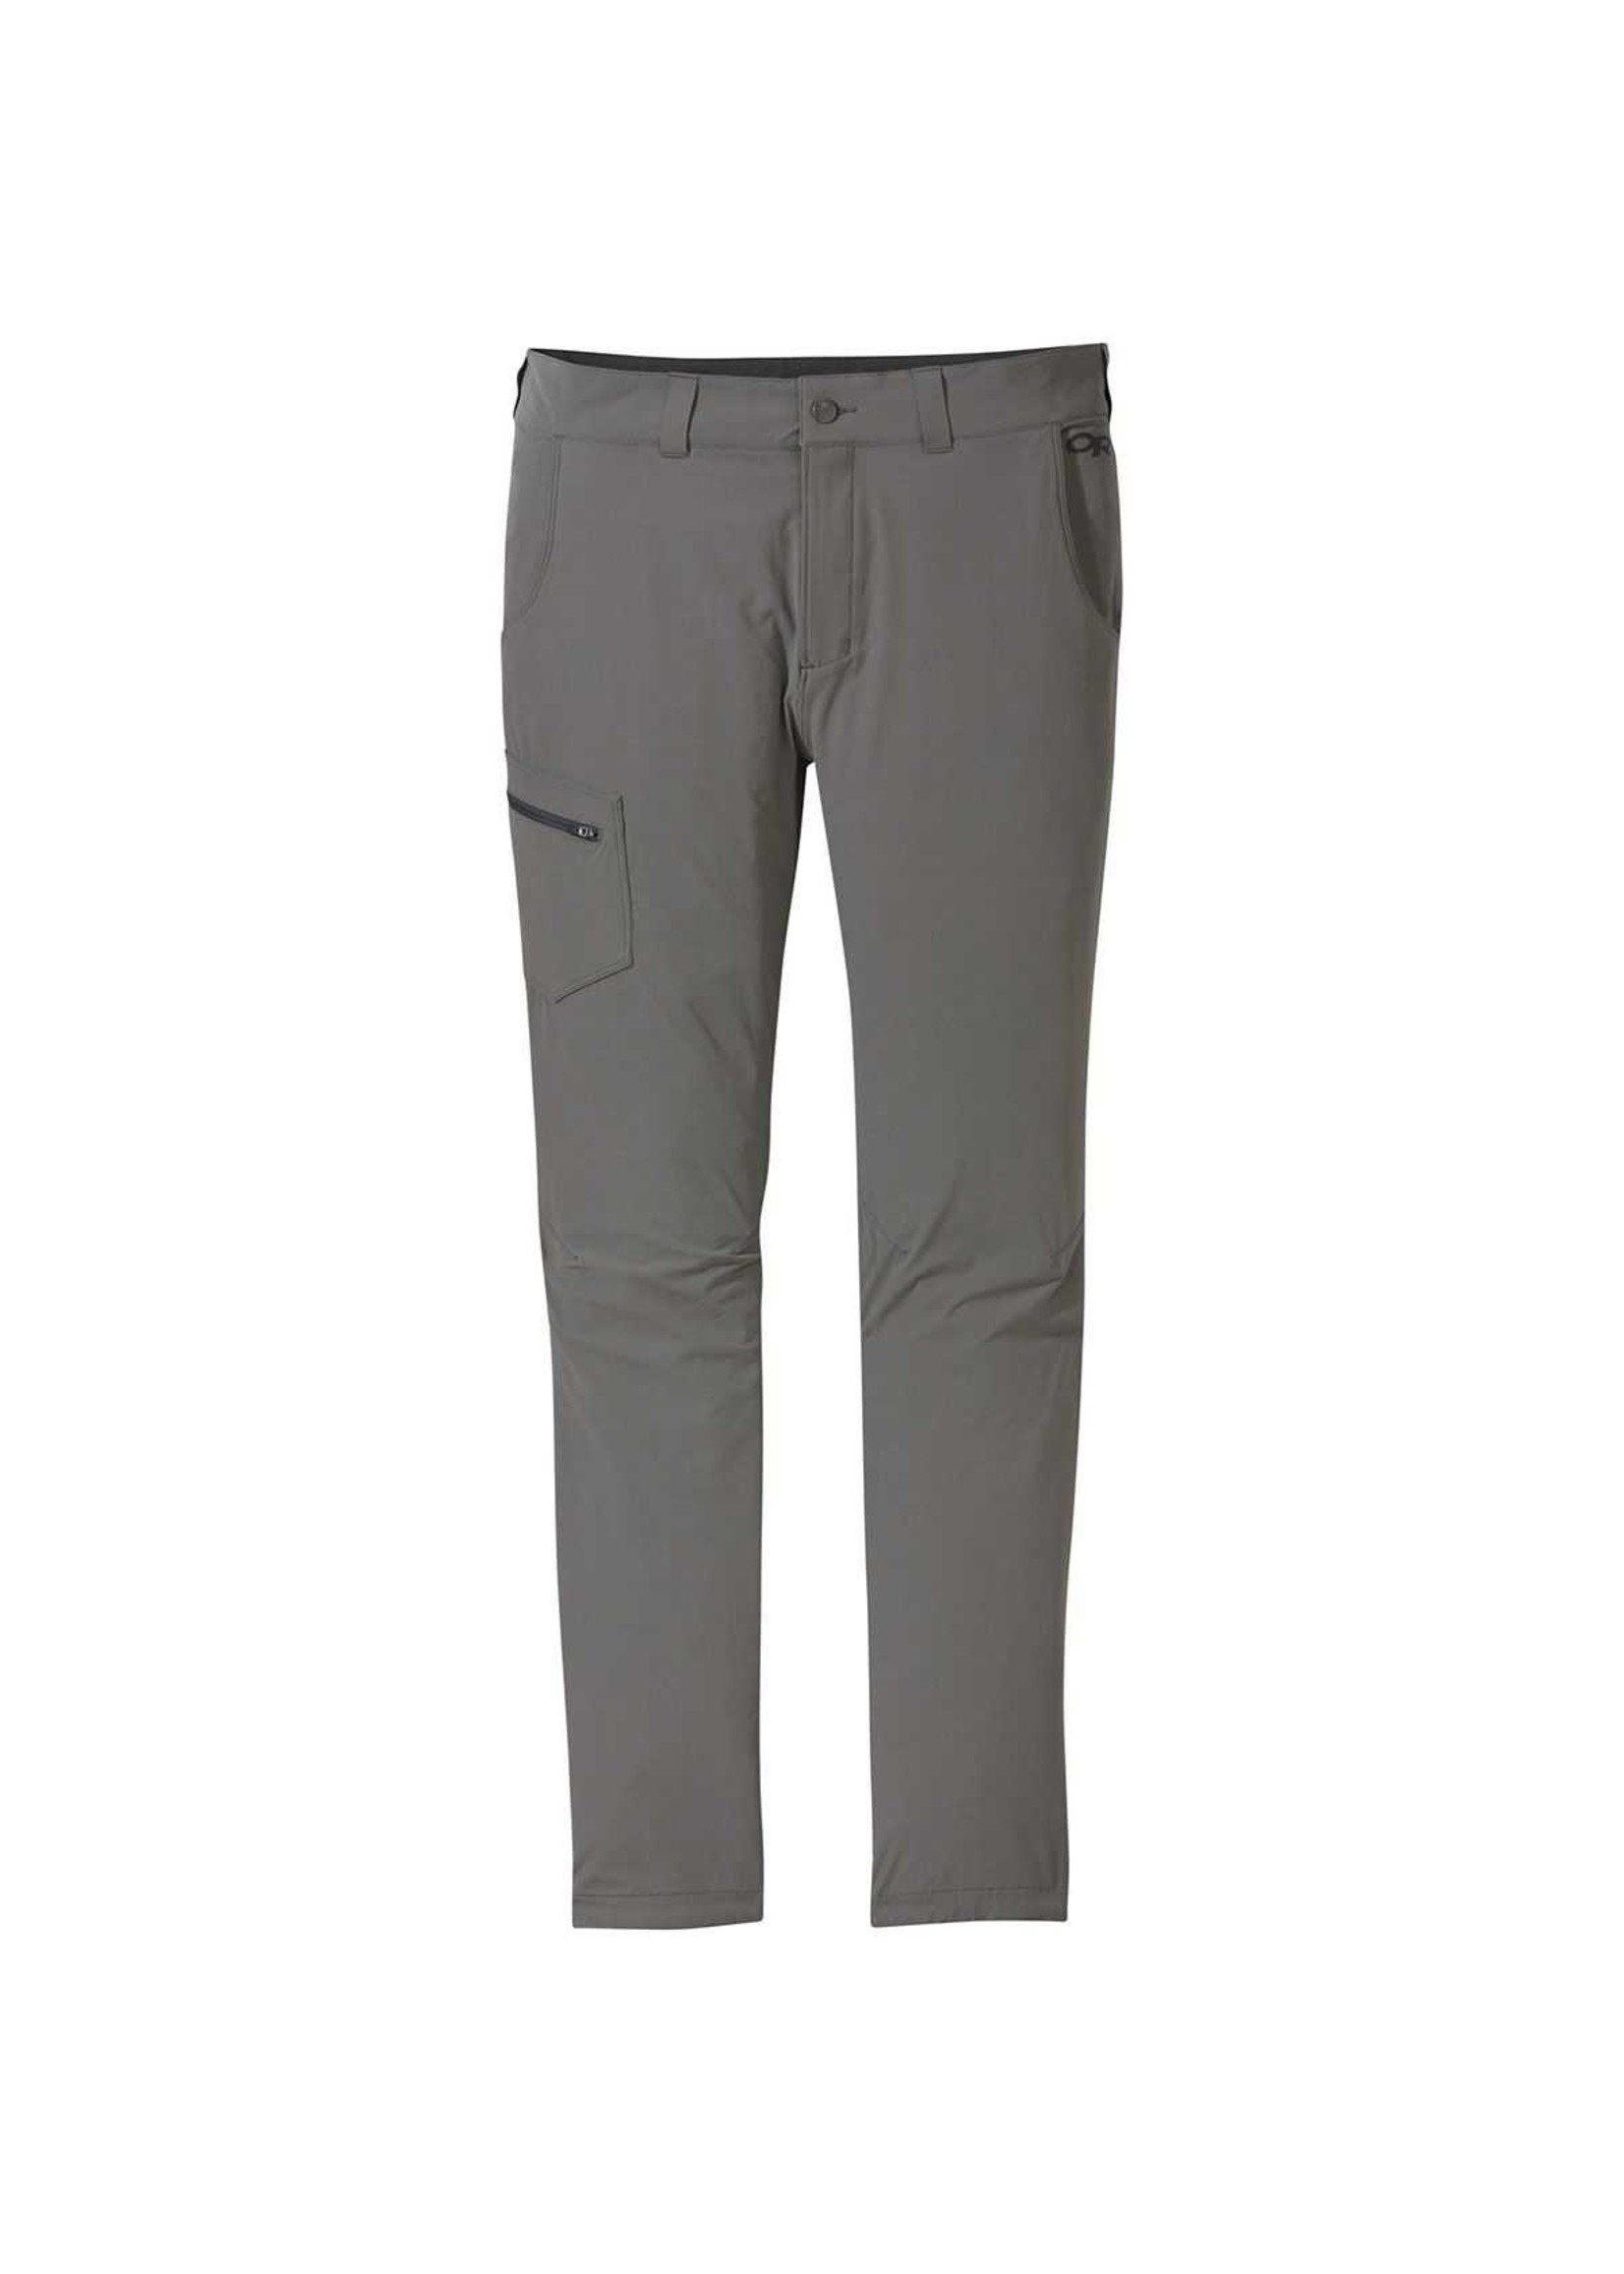 Outdoor Research Pantalons Ferrosi pour hommes